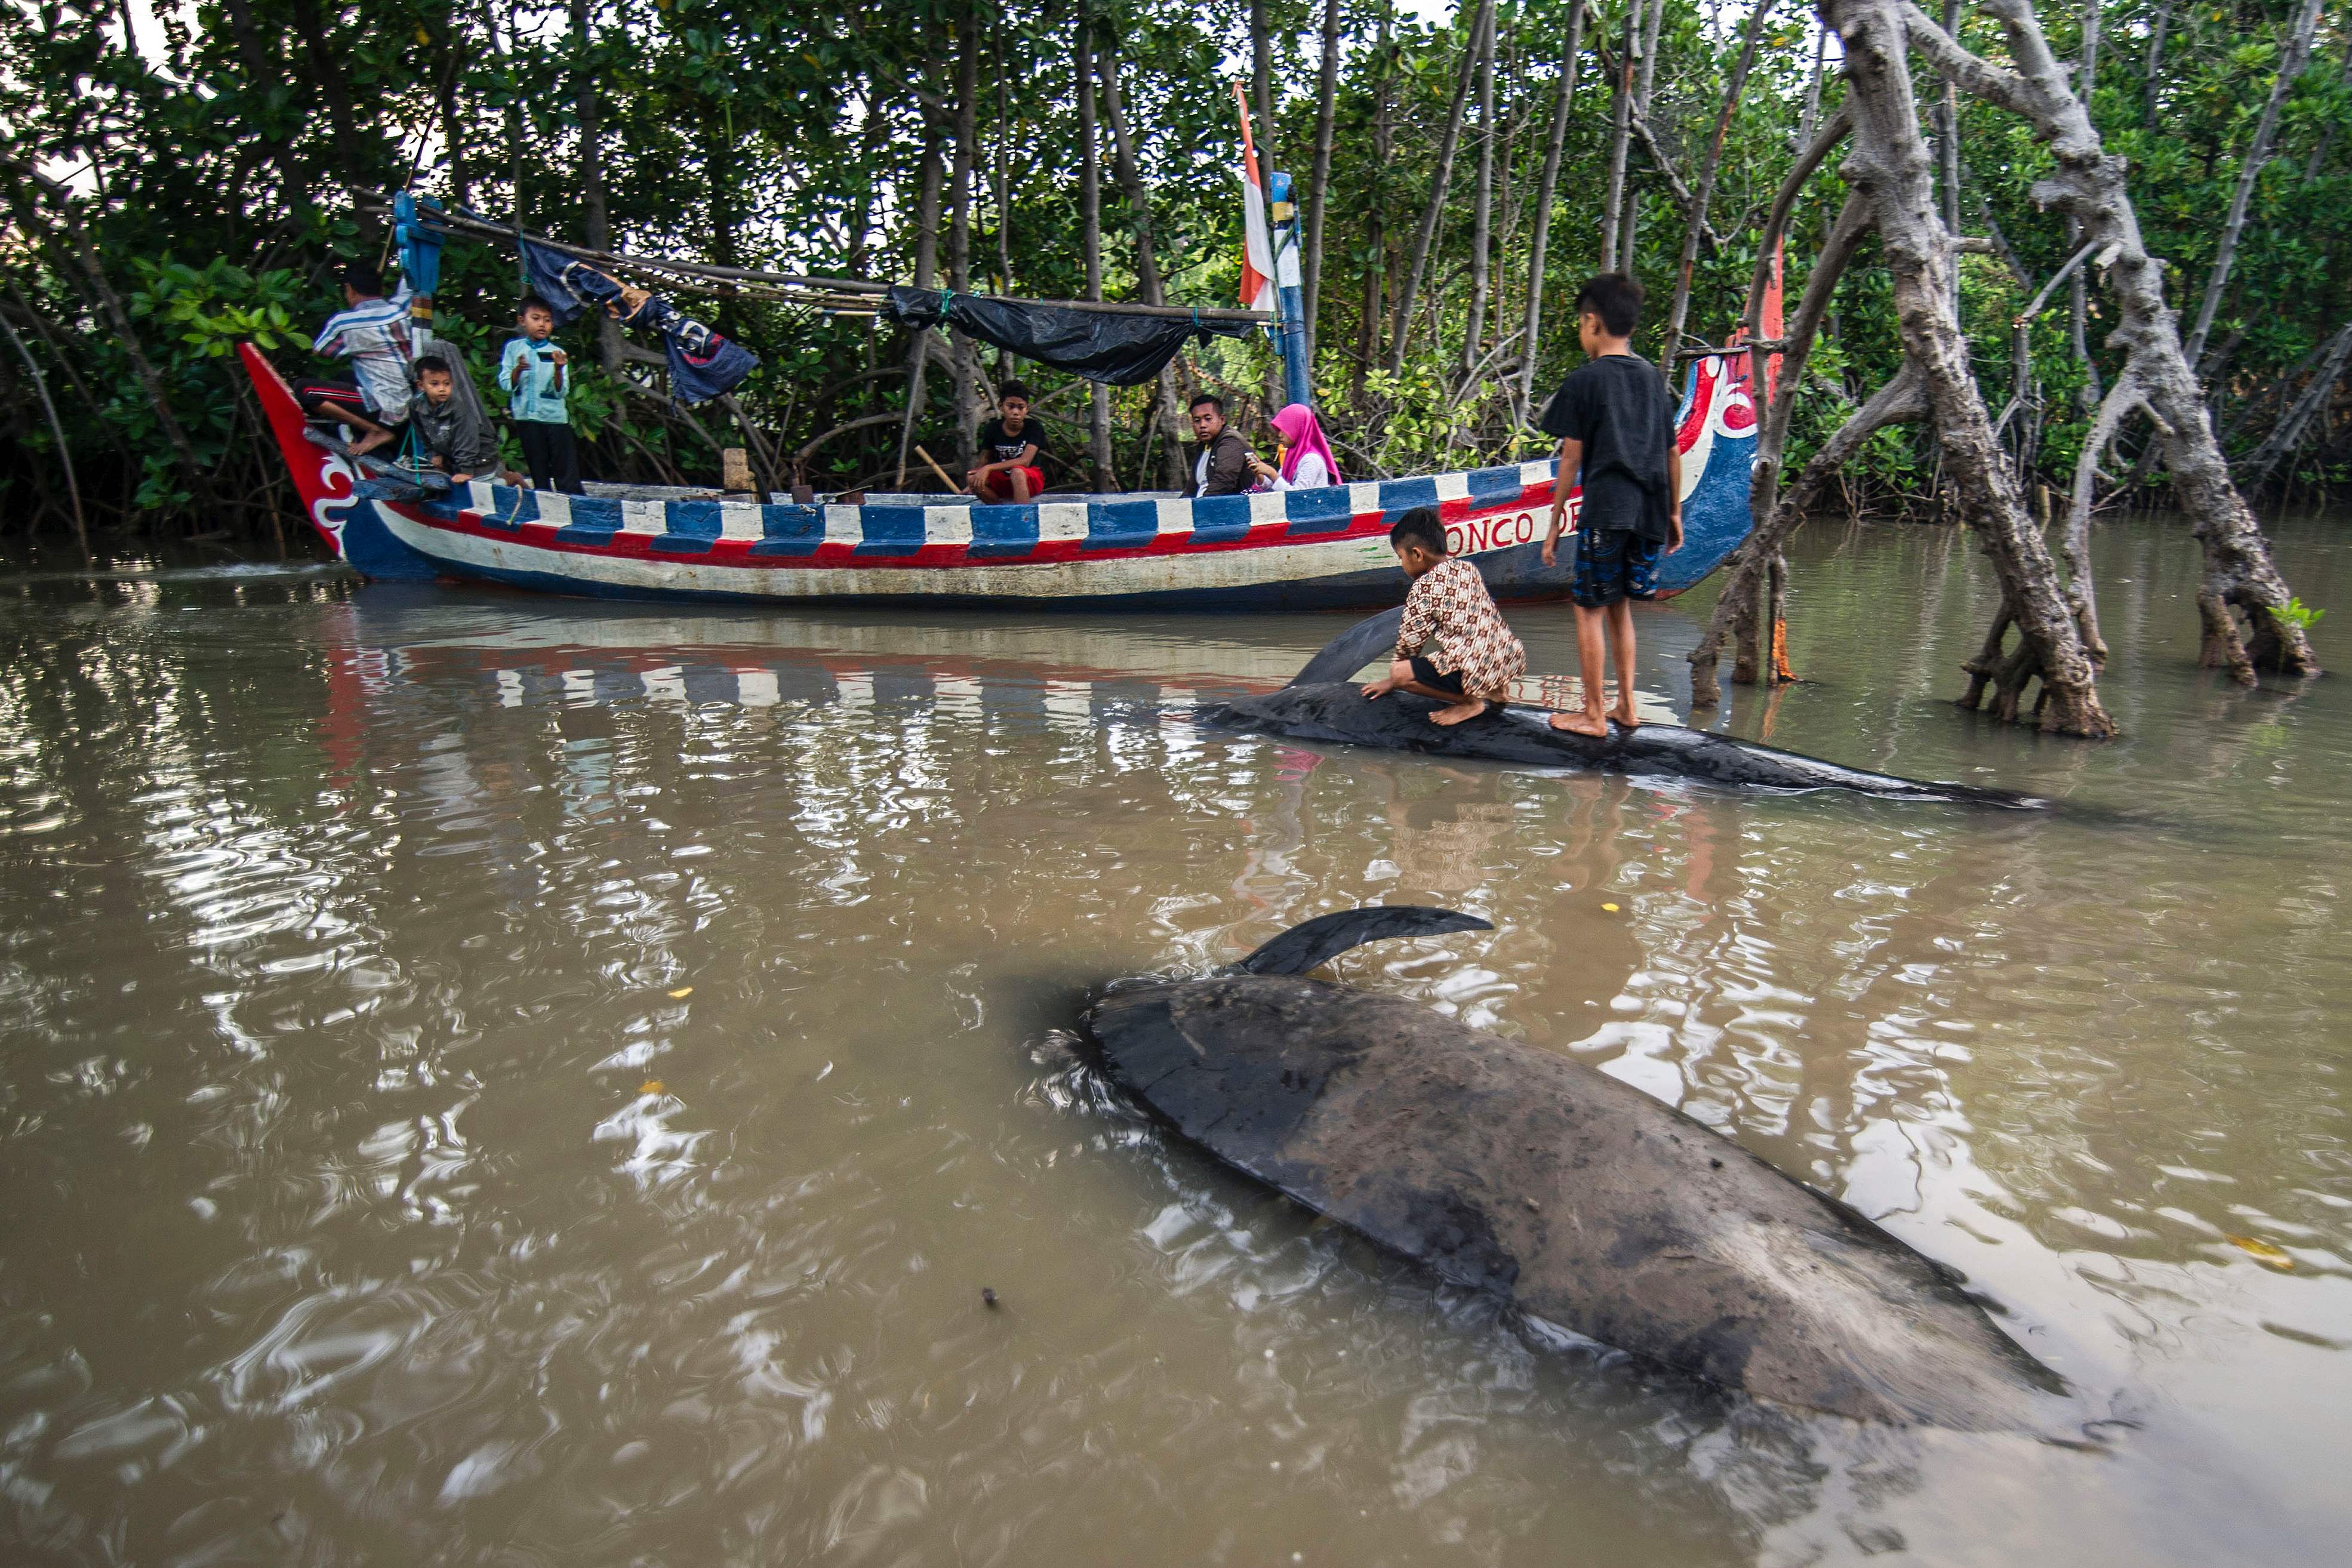 Rescuers struggle to save beached whales in Indonesia